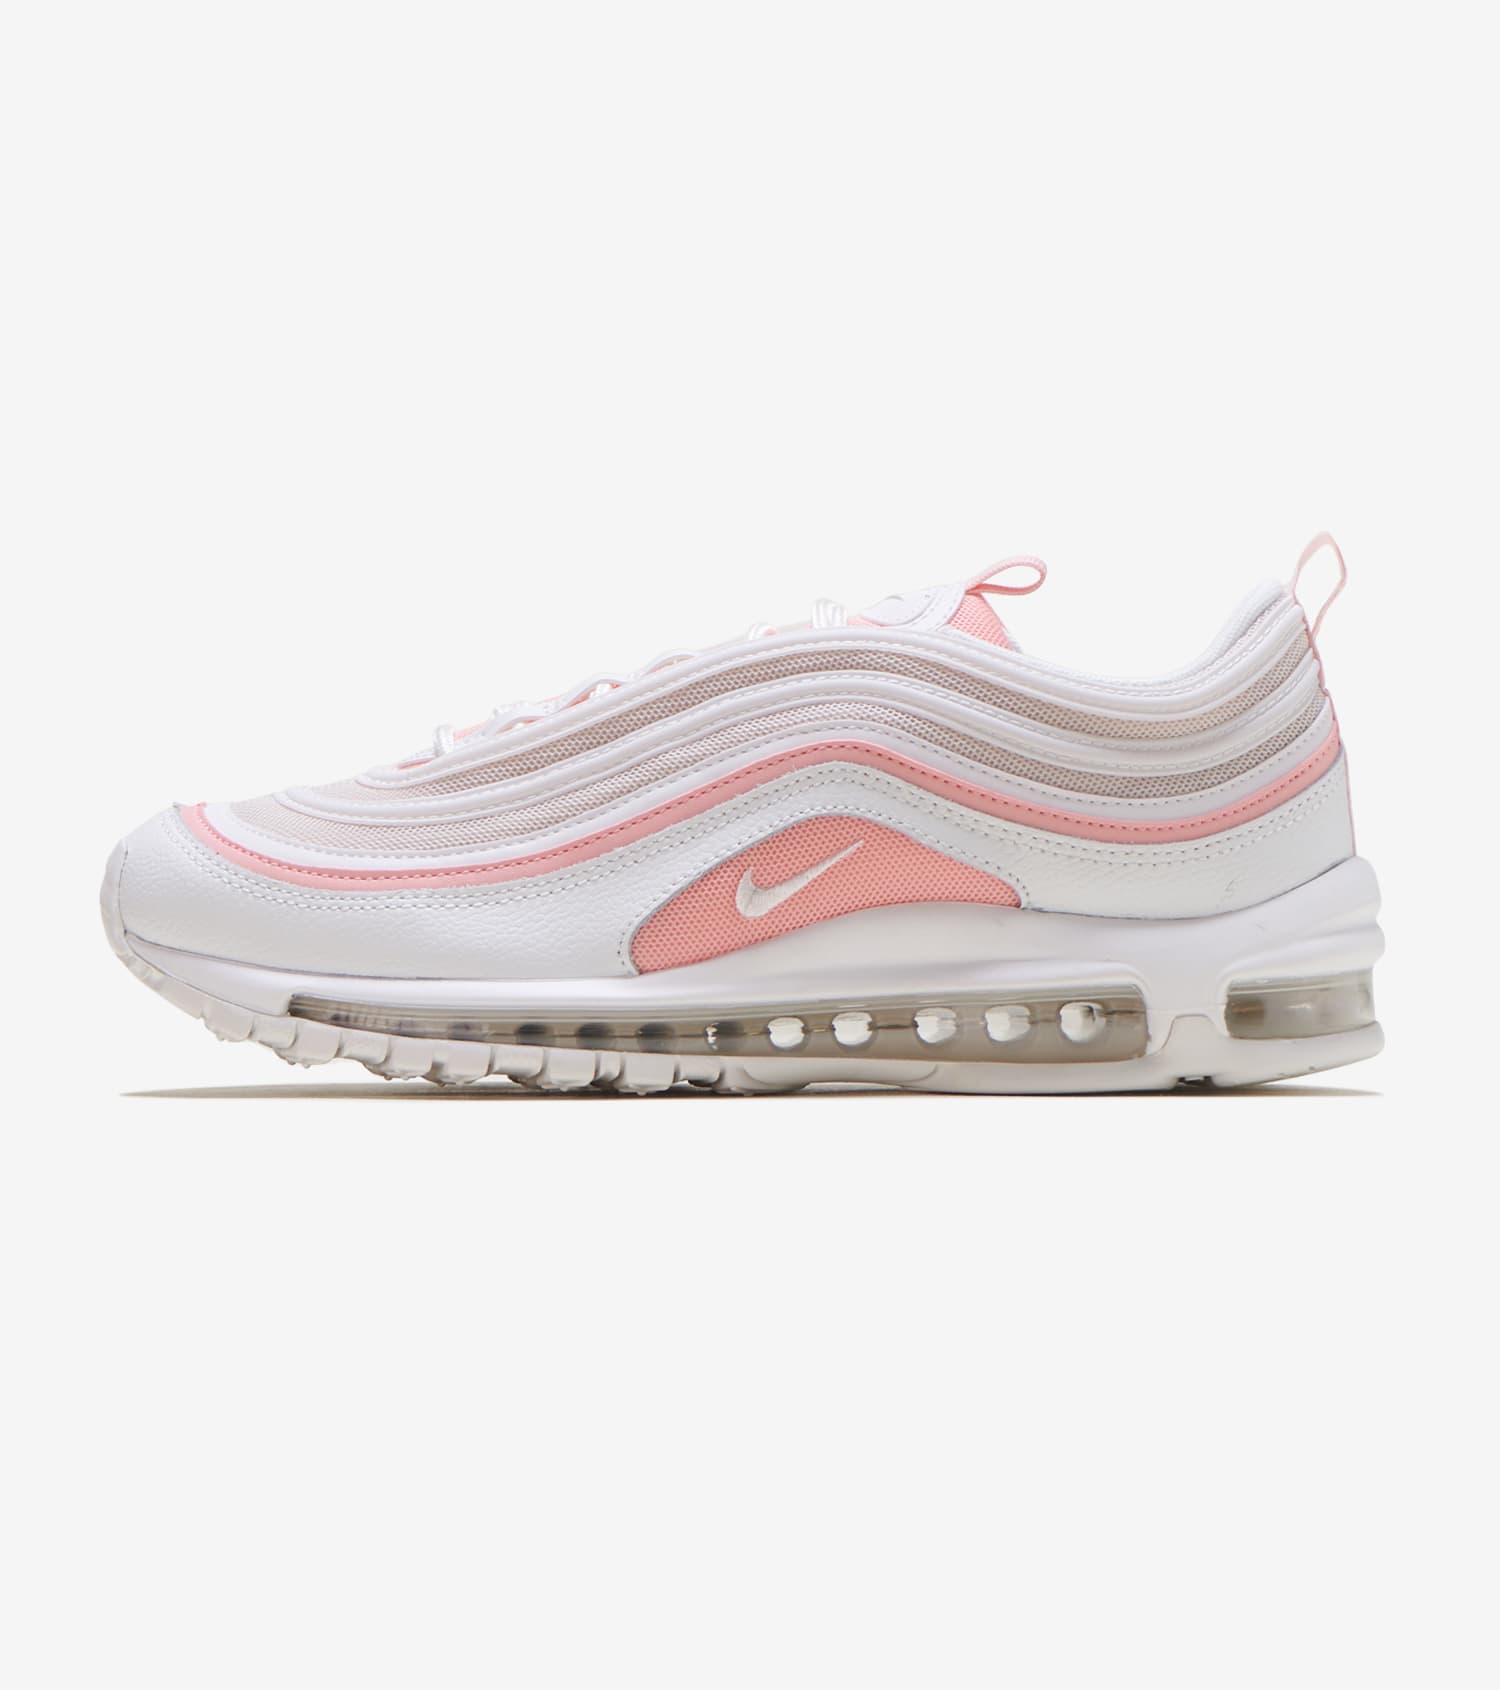 in conversation with club archangel air max '97 i D